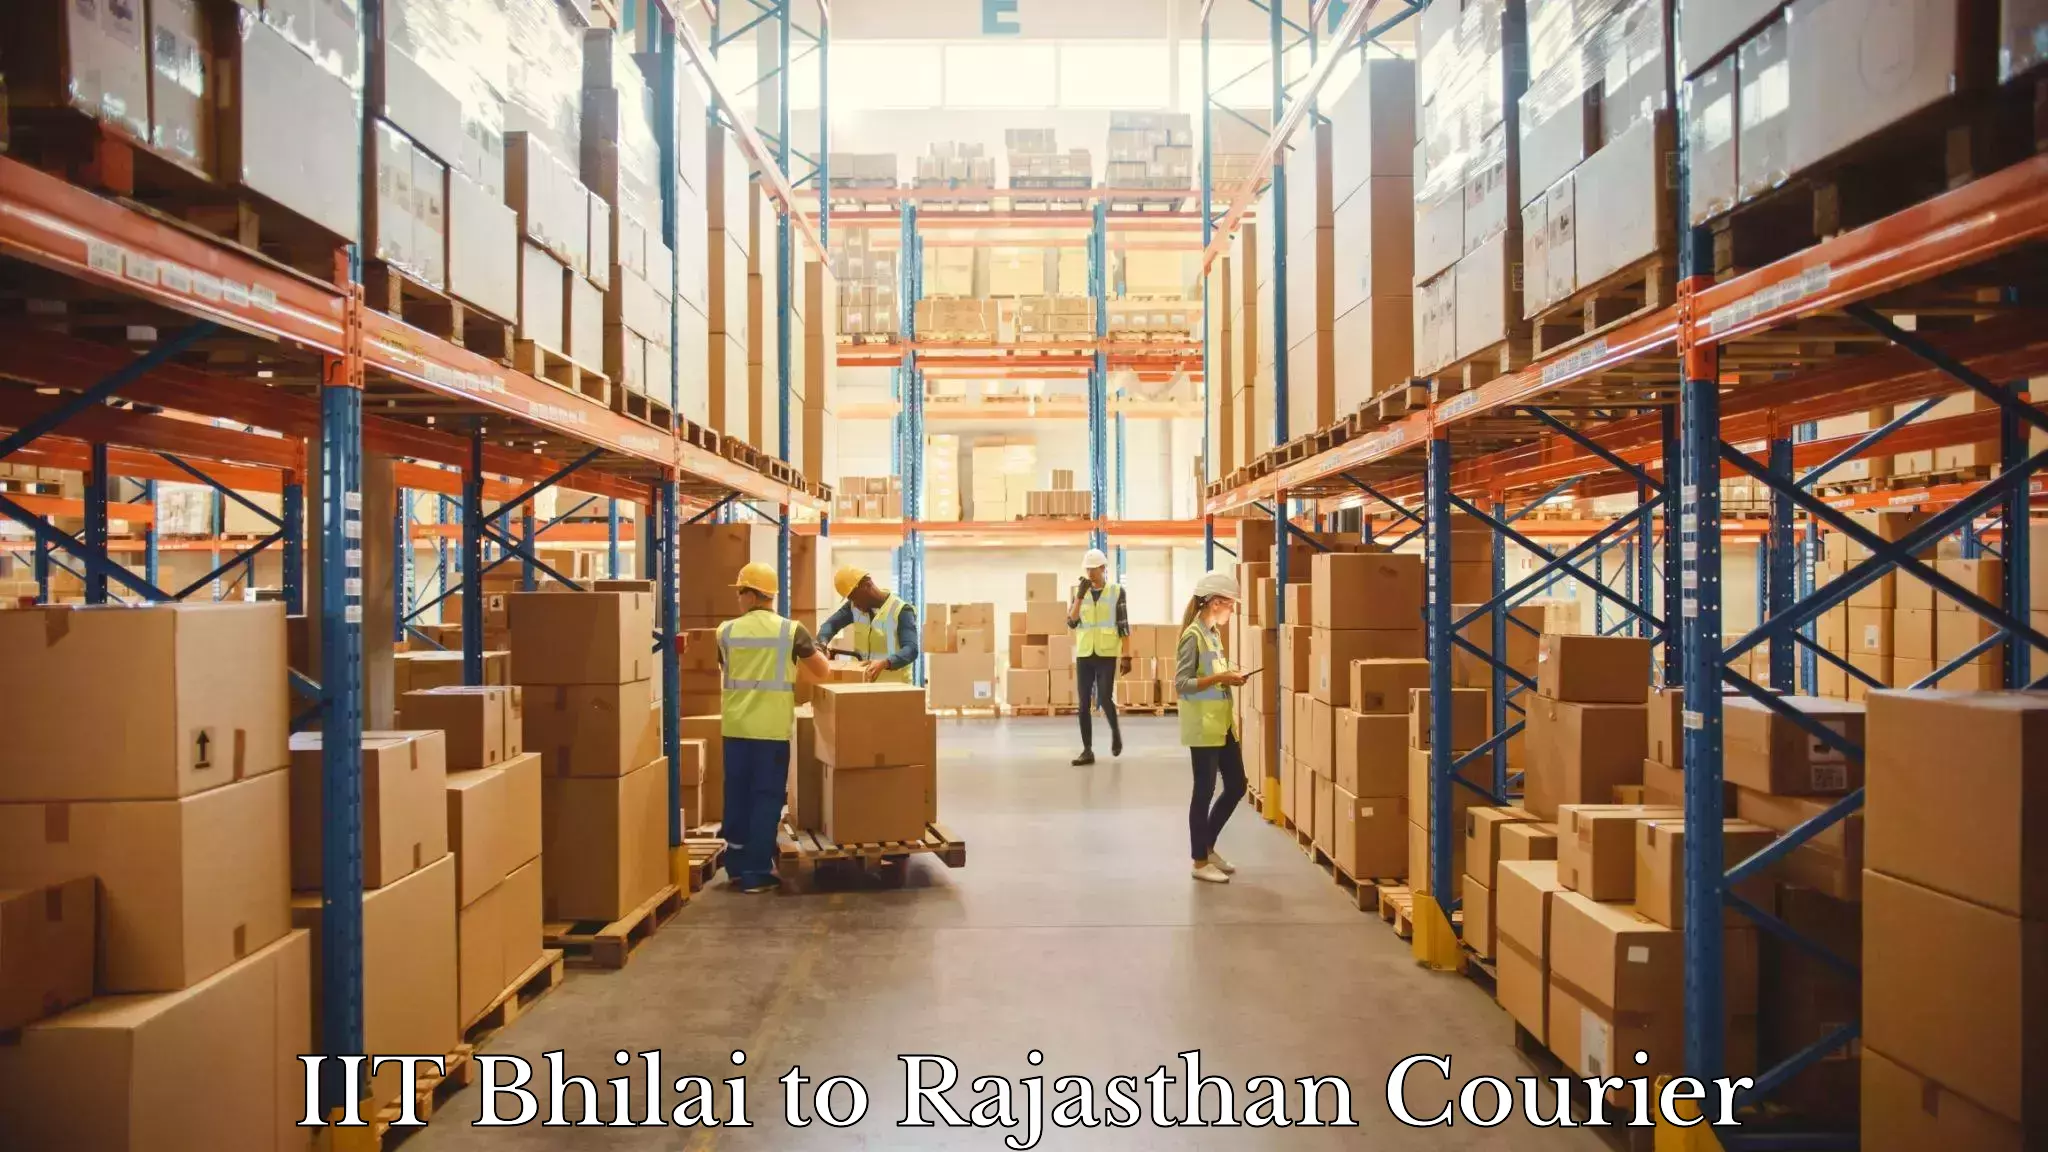 Courier service booking IIT Bhilai to Rajasthan